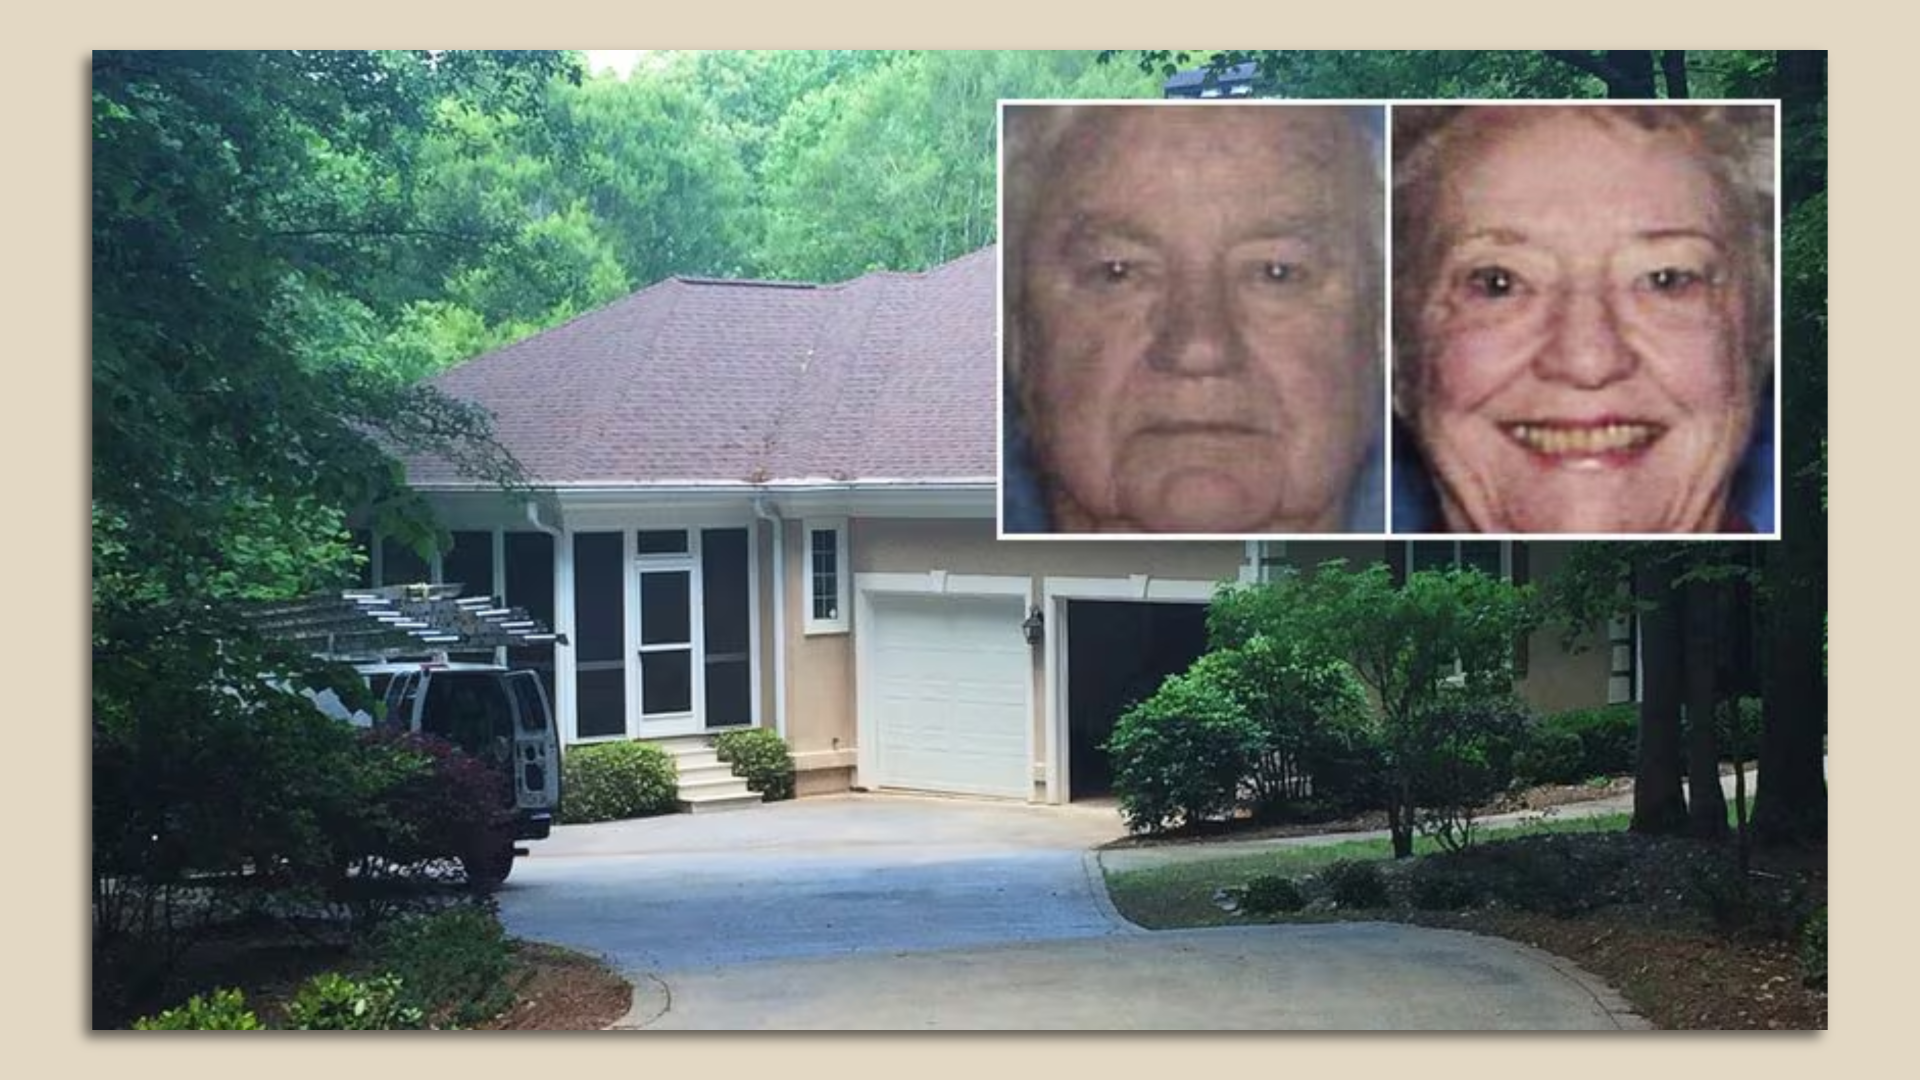 Side by side photos of a senior man and woman overset on an image of a driveway leading to a tan colored home with an open garage door.